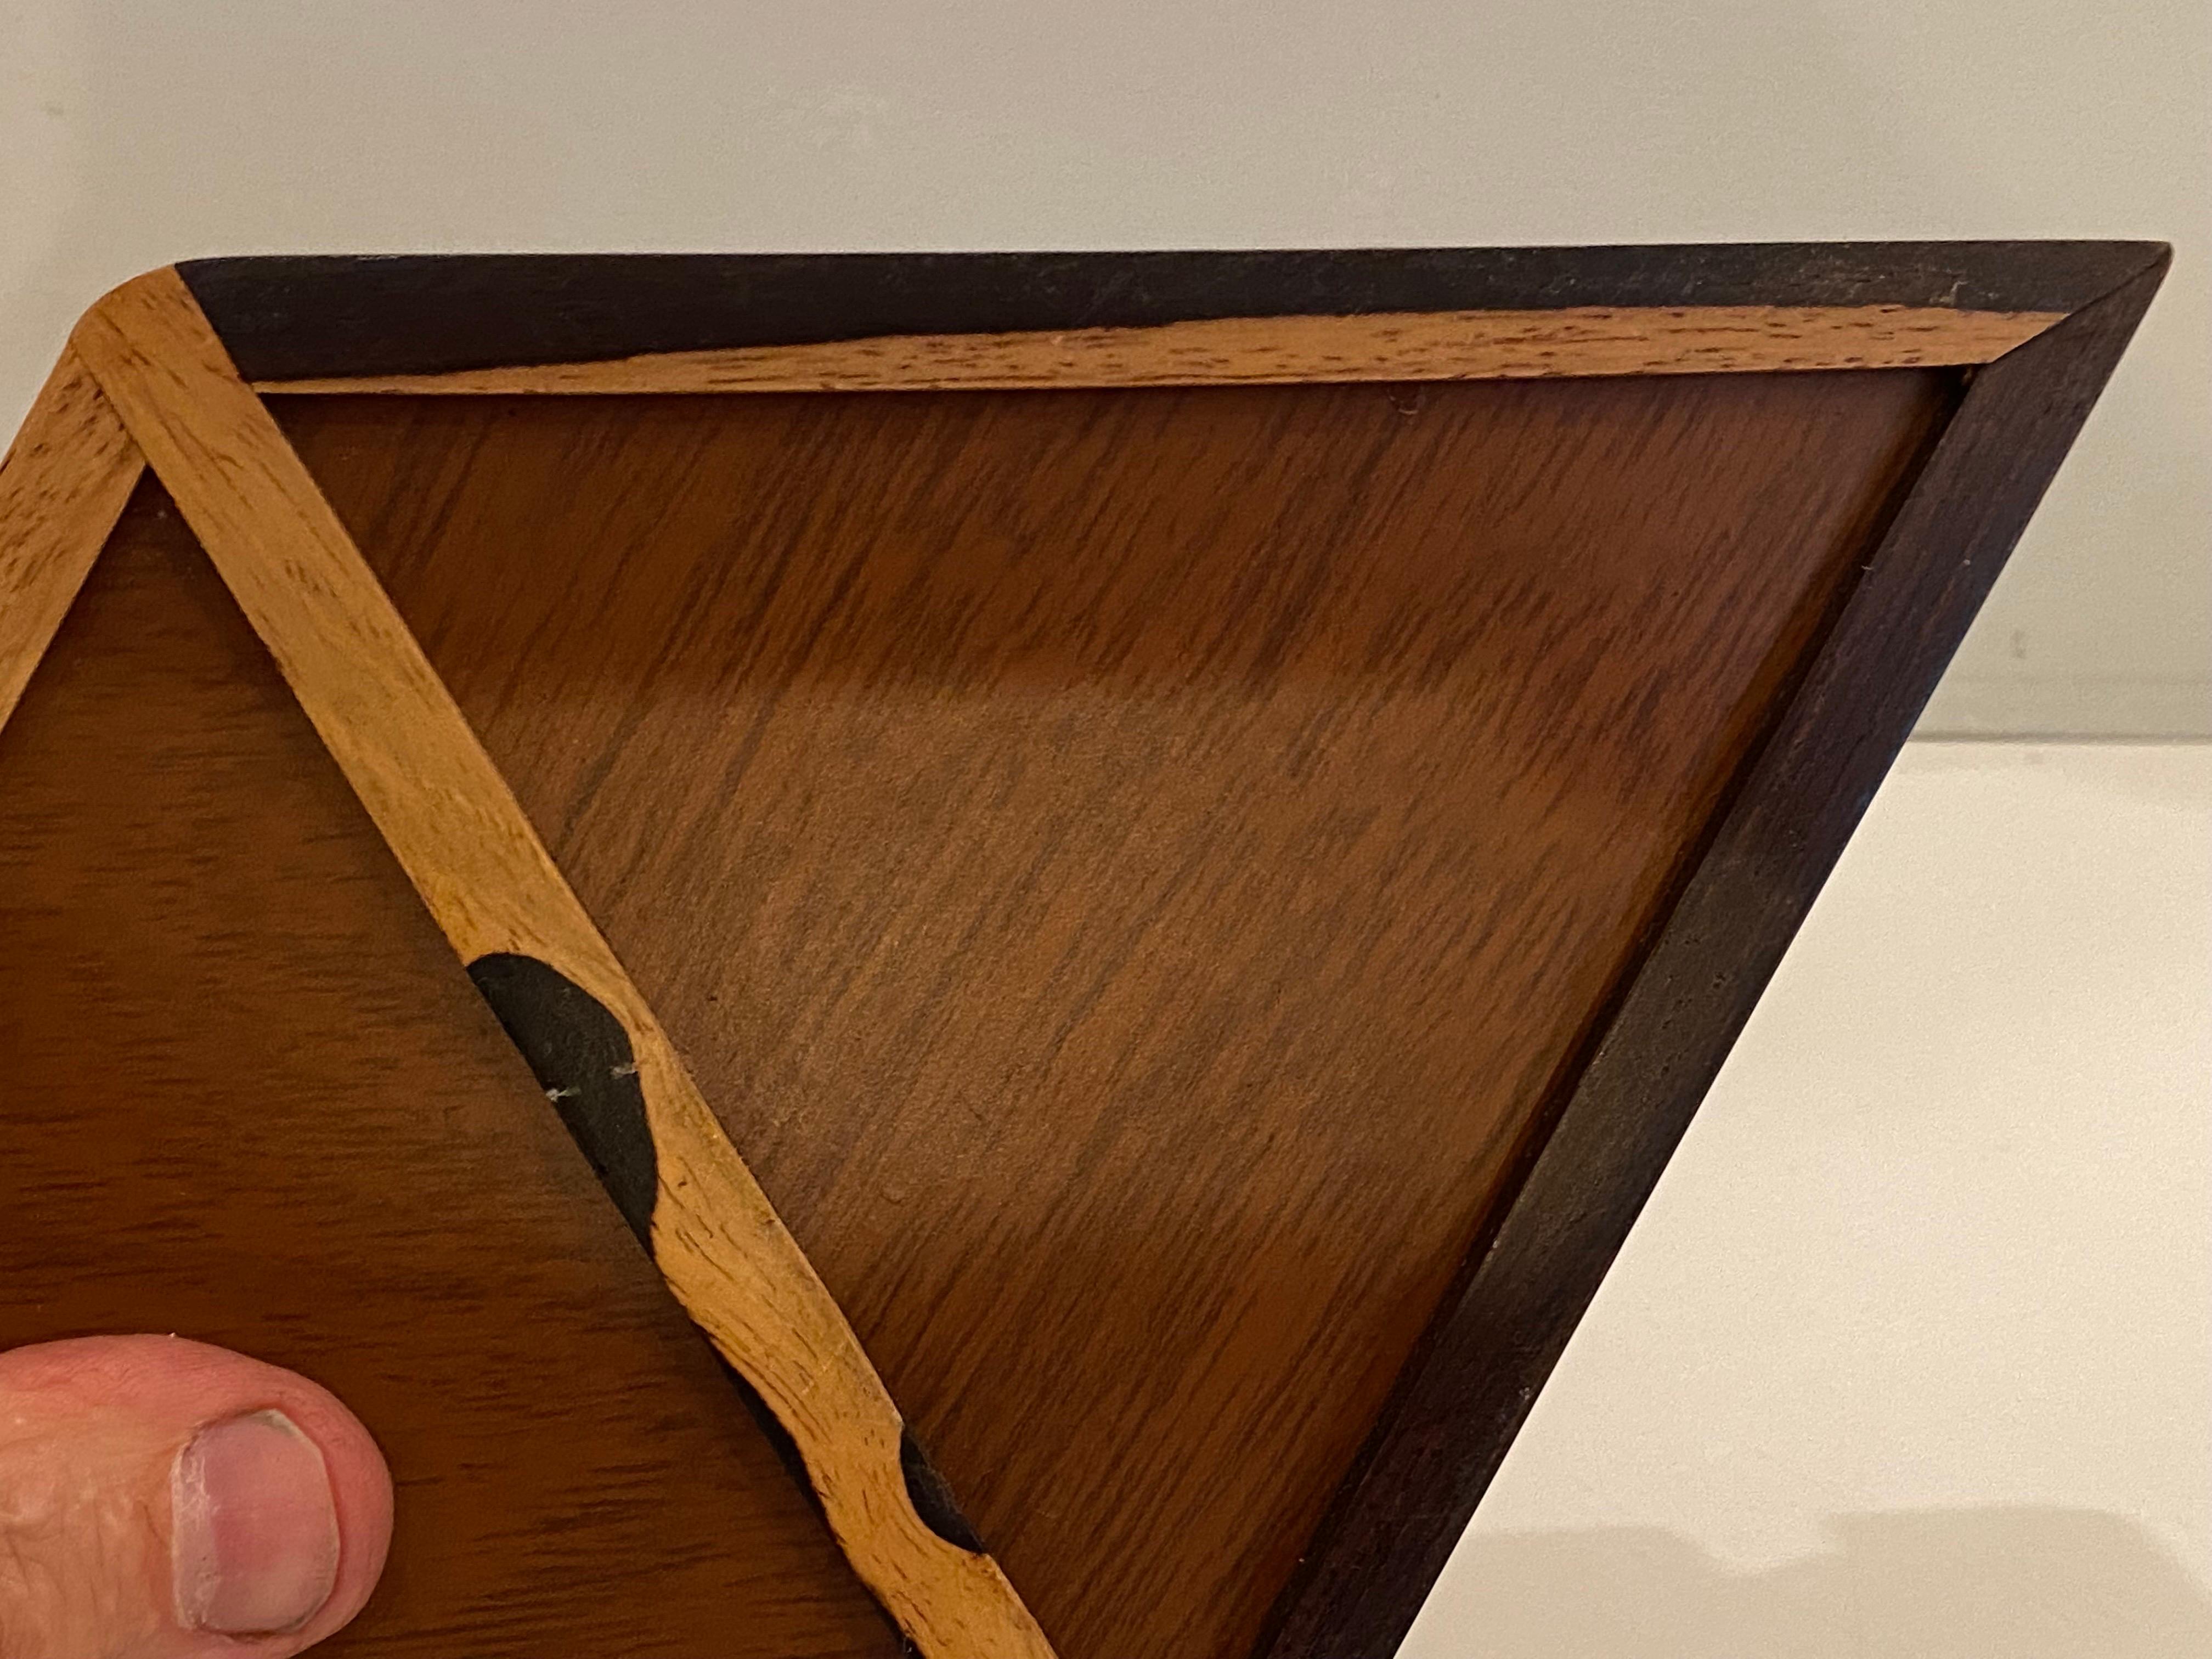 Beautifully made Rosewood Jewelry Box.  2 Triangular Lids open to reveal a velvet lined interior.  Carved handle makes it easy to access interior.  In very Nice Shape, unsigned!